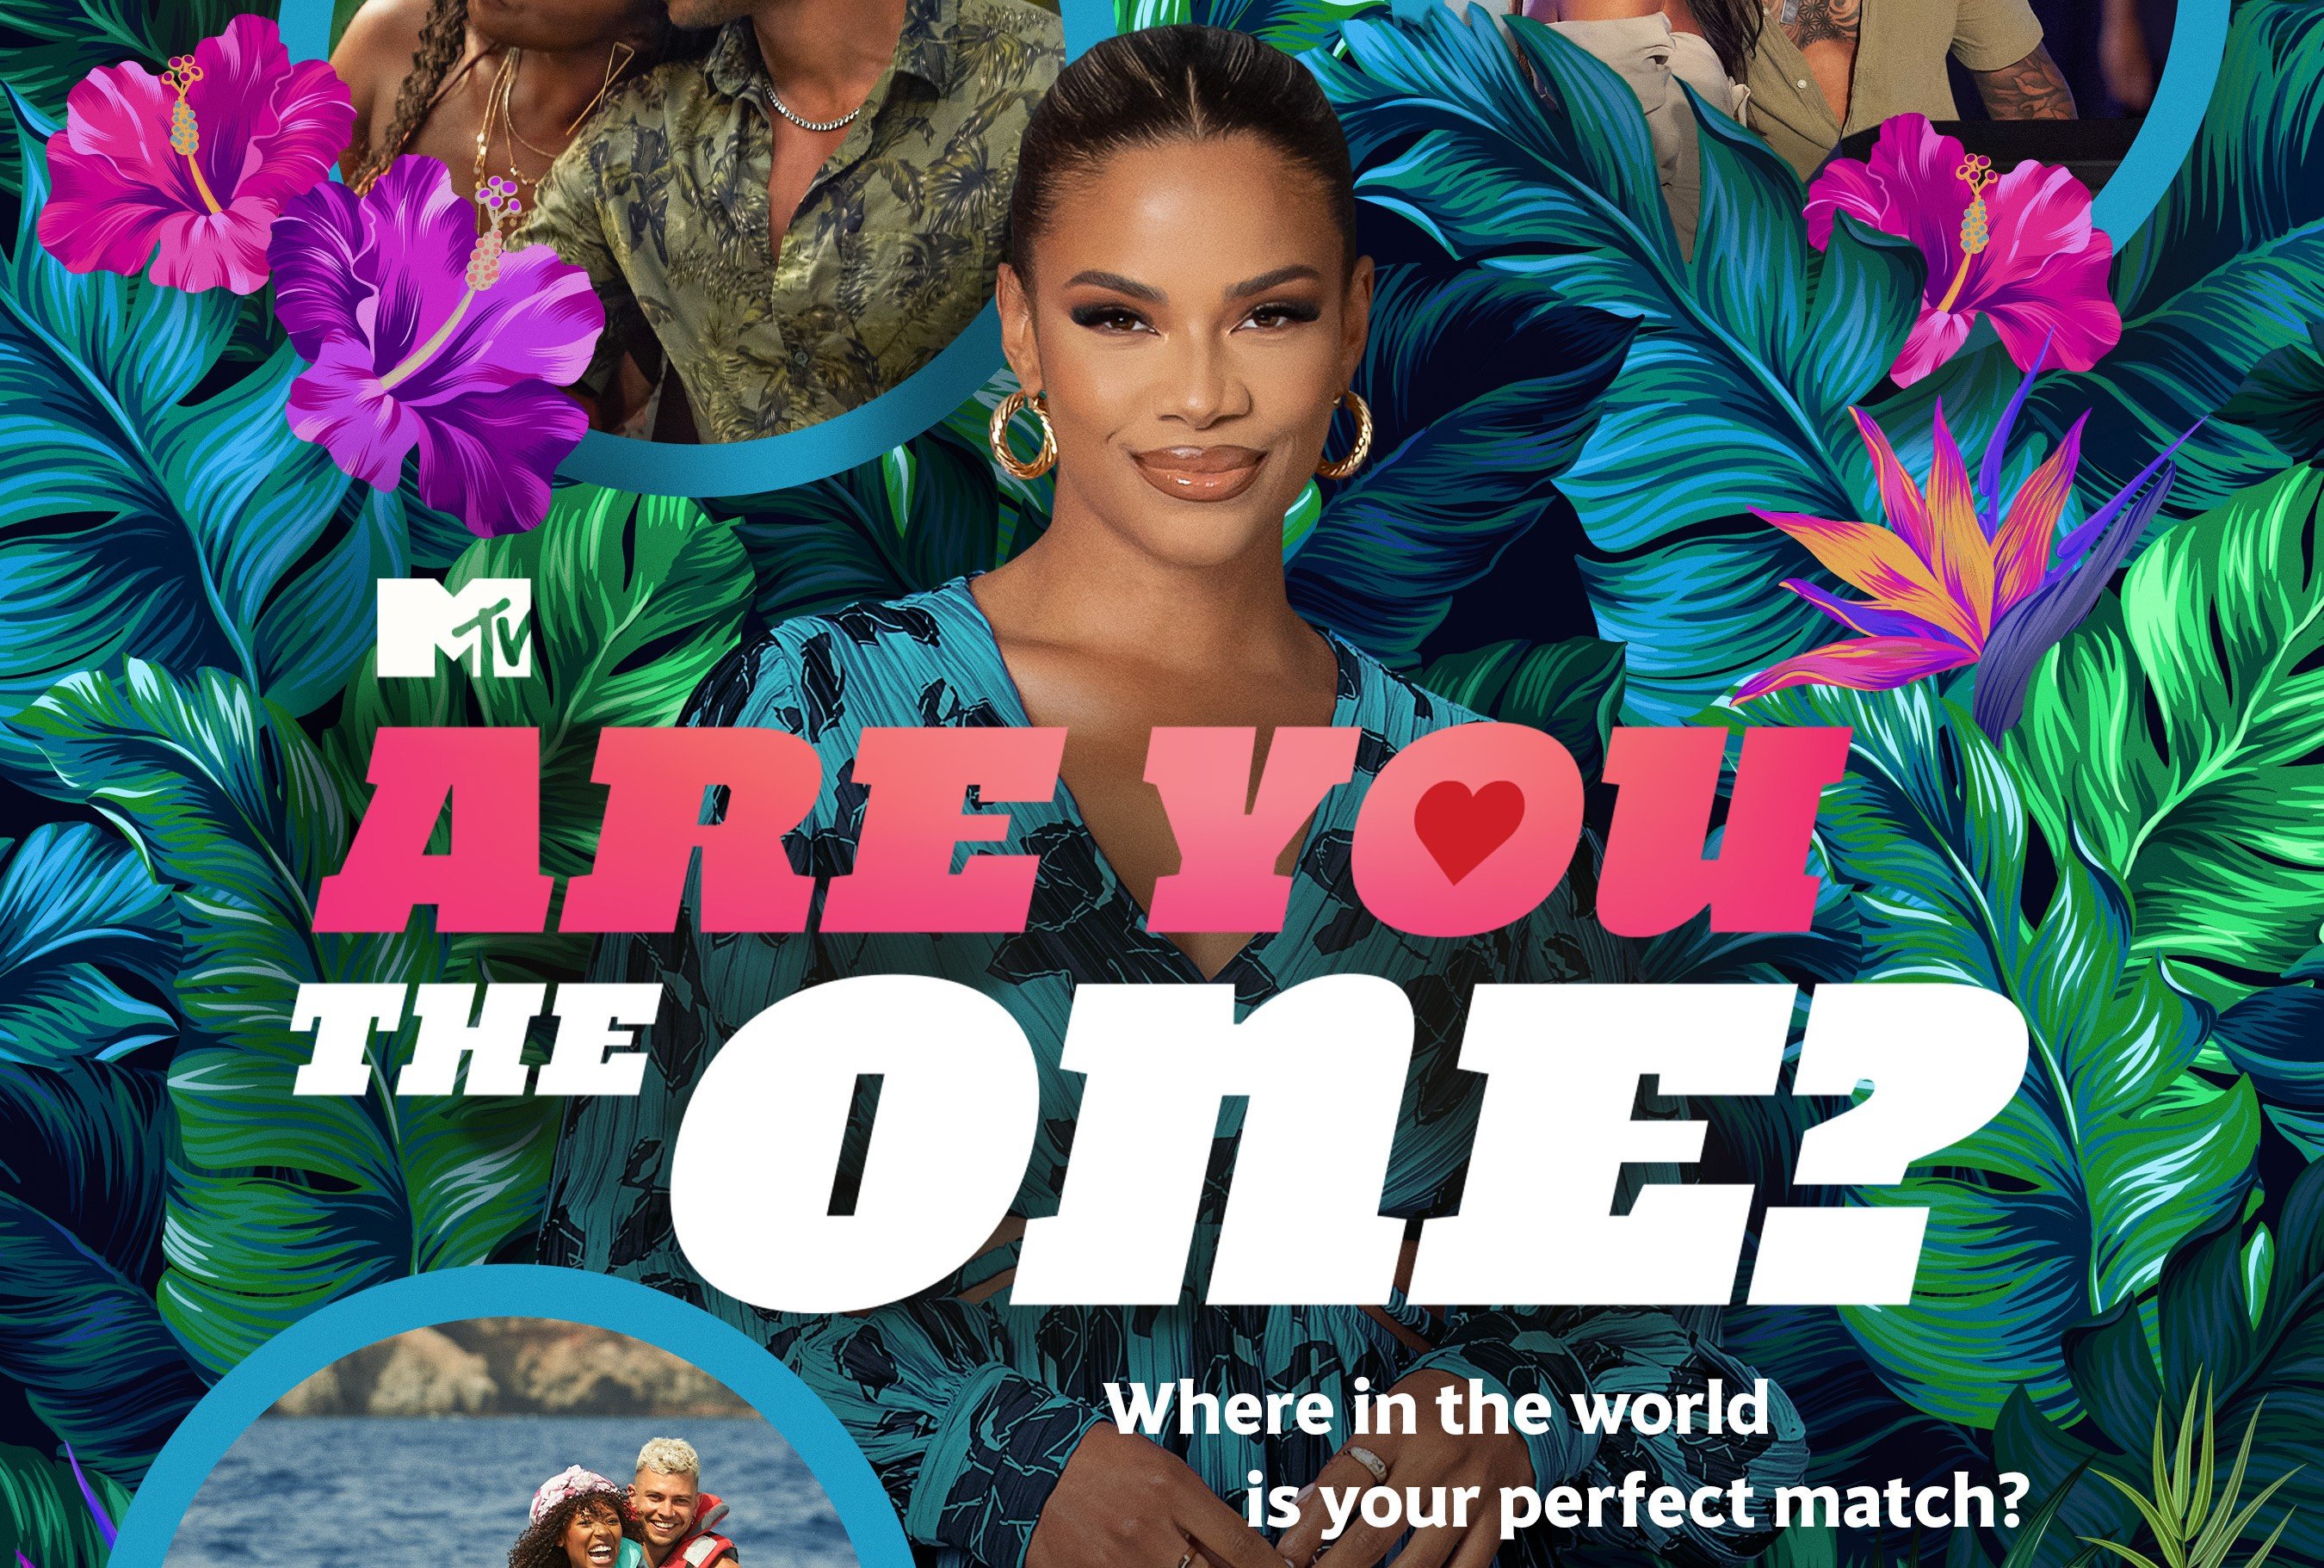 Kamie Crawford, the host of 'Are You the One?' Season 9, appears on the season's poster for Paramount+.